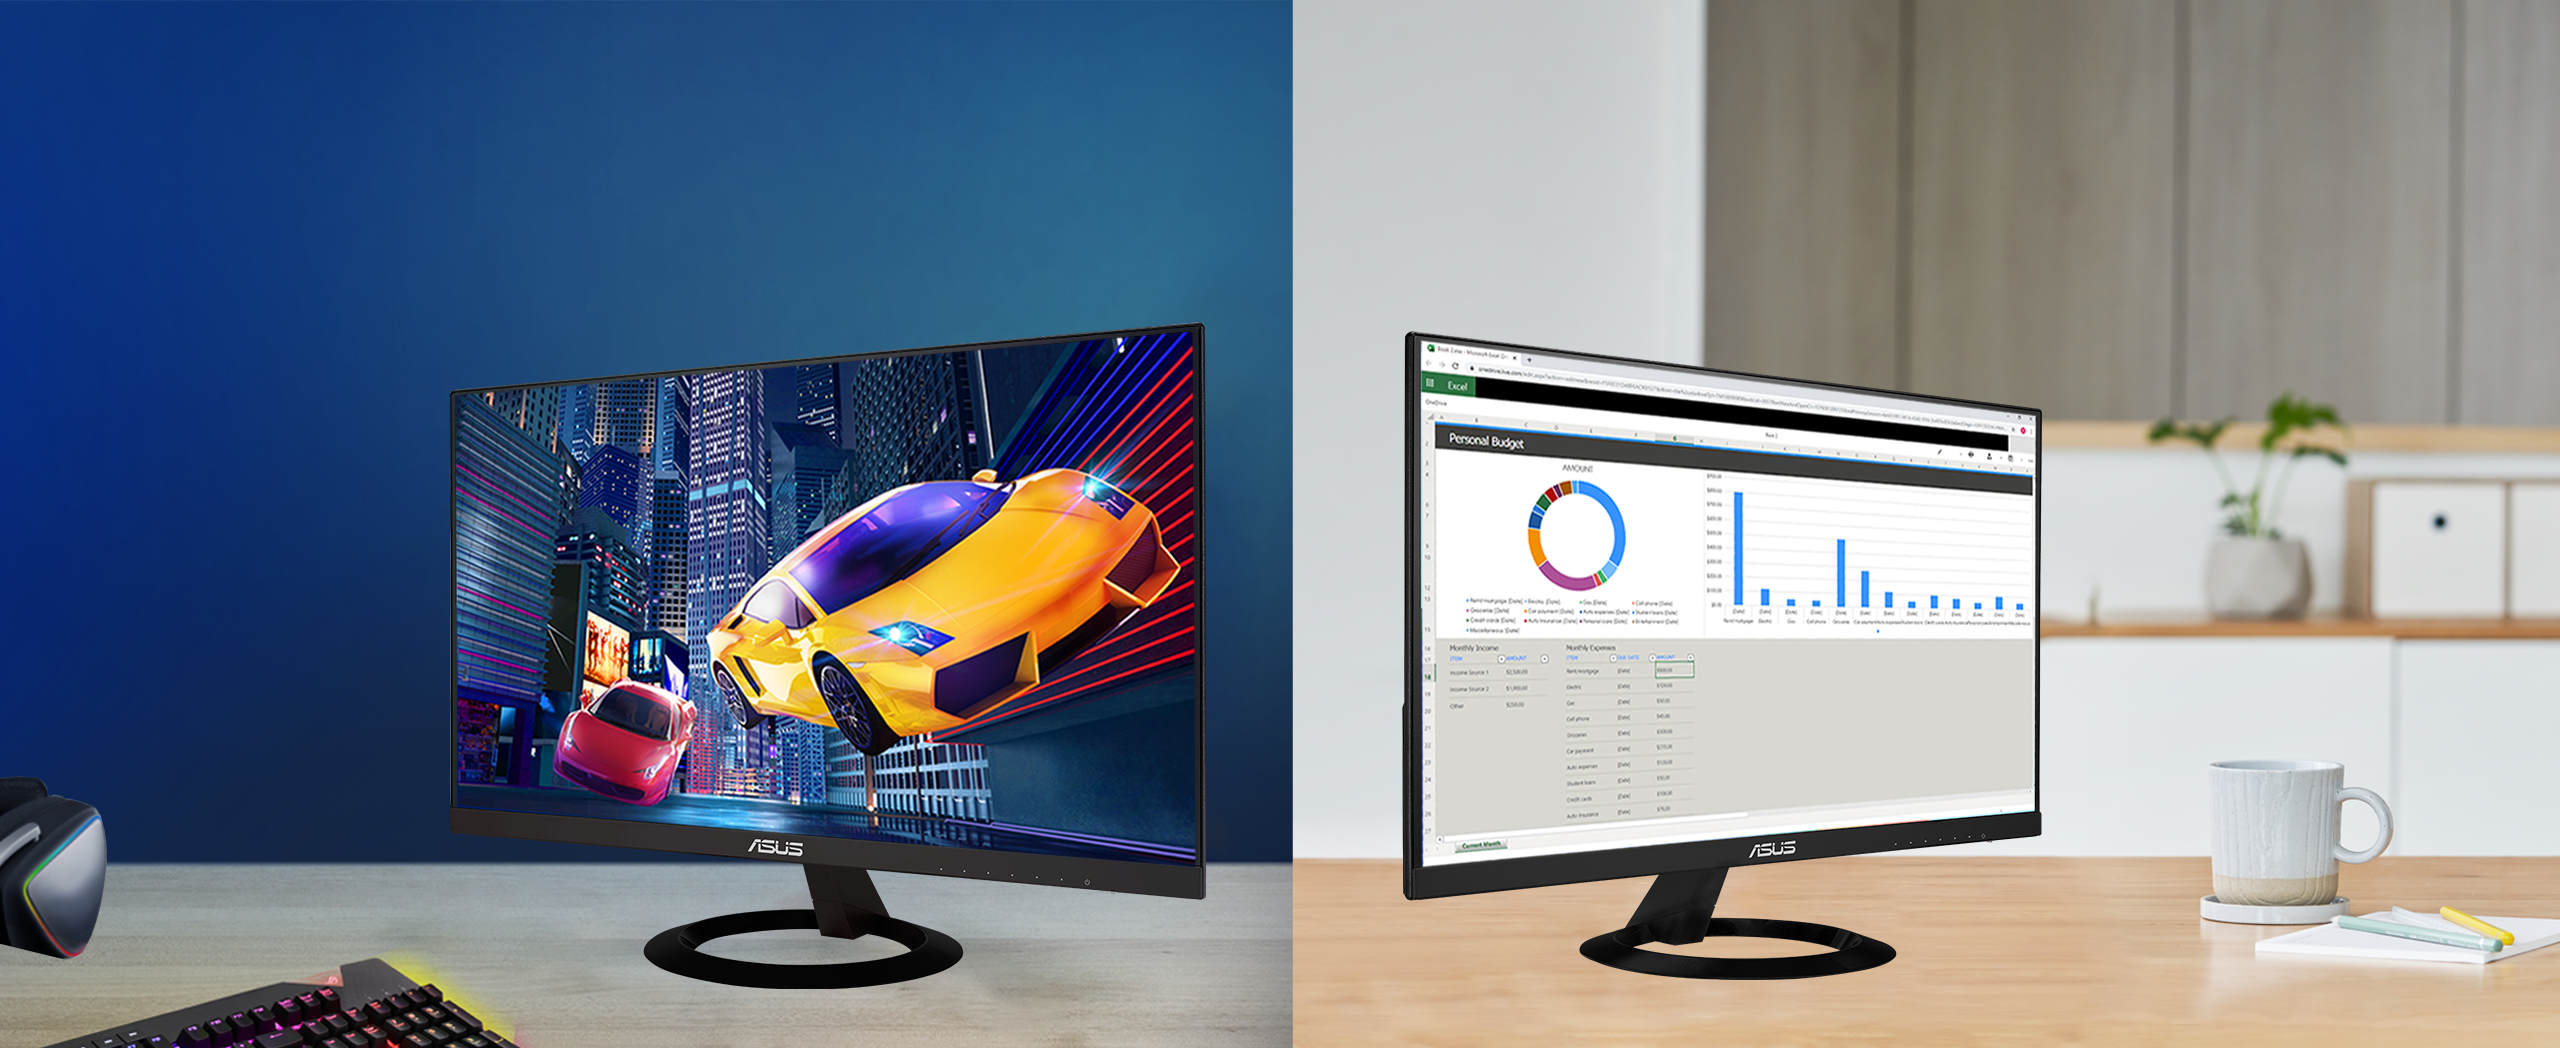 ASUS VZ249HFA is 23.8-inch IPS Eye Care Gaming monitor with fast 100Hz refresh rate and Adaptive-Sync technology to eliminate screen tearing and choppy frame rates for the smoother-than-ever experience.